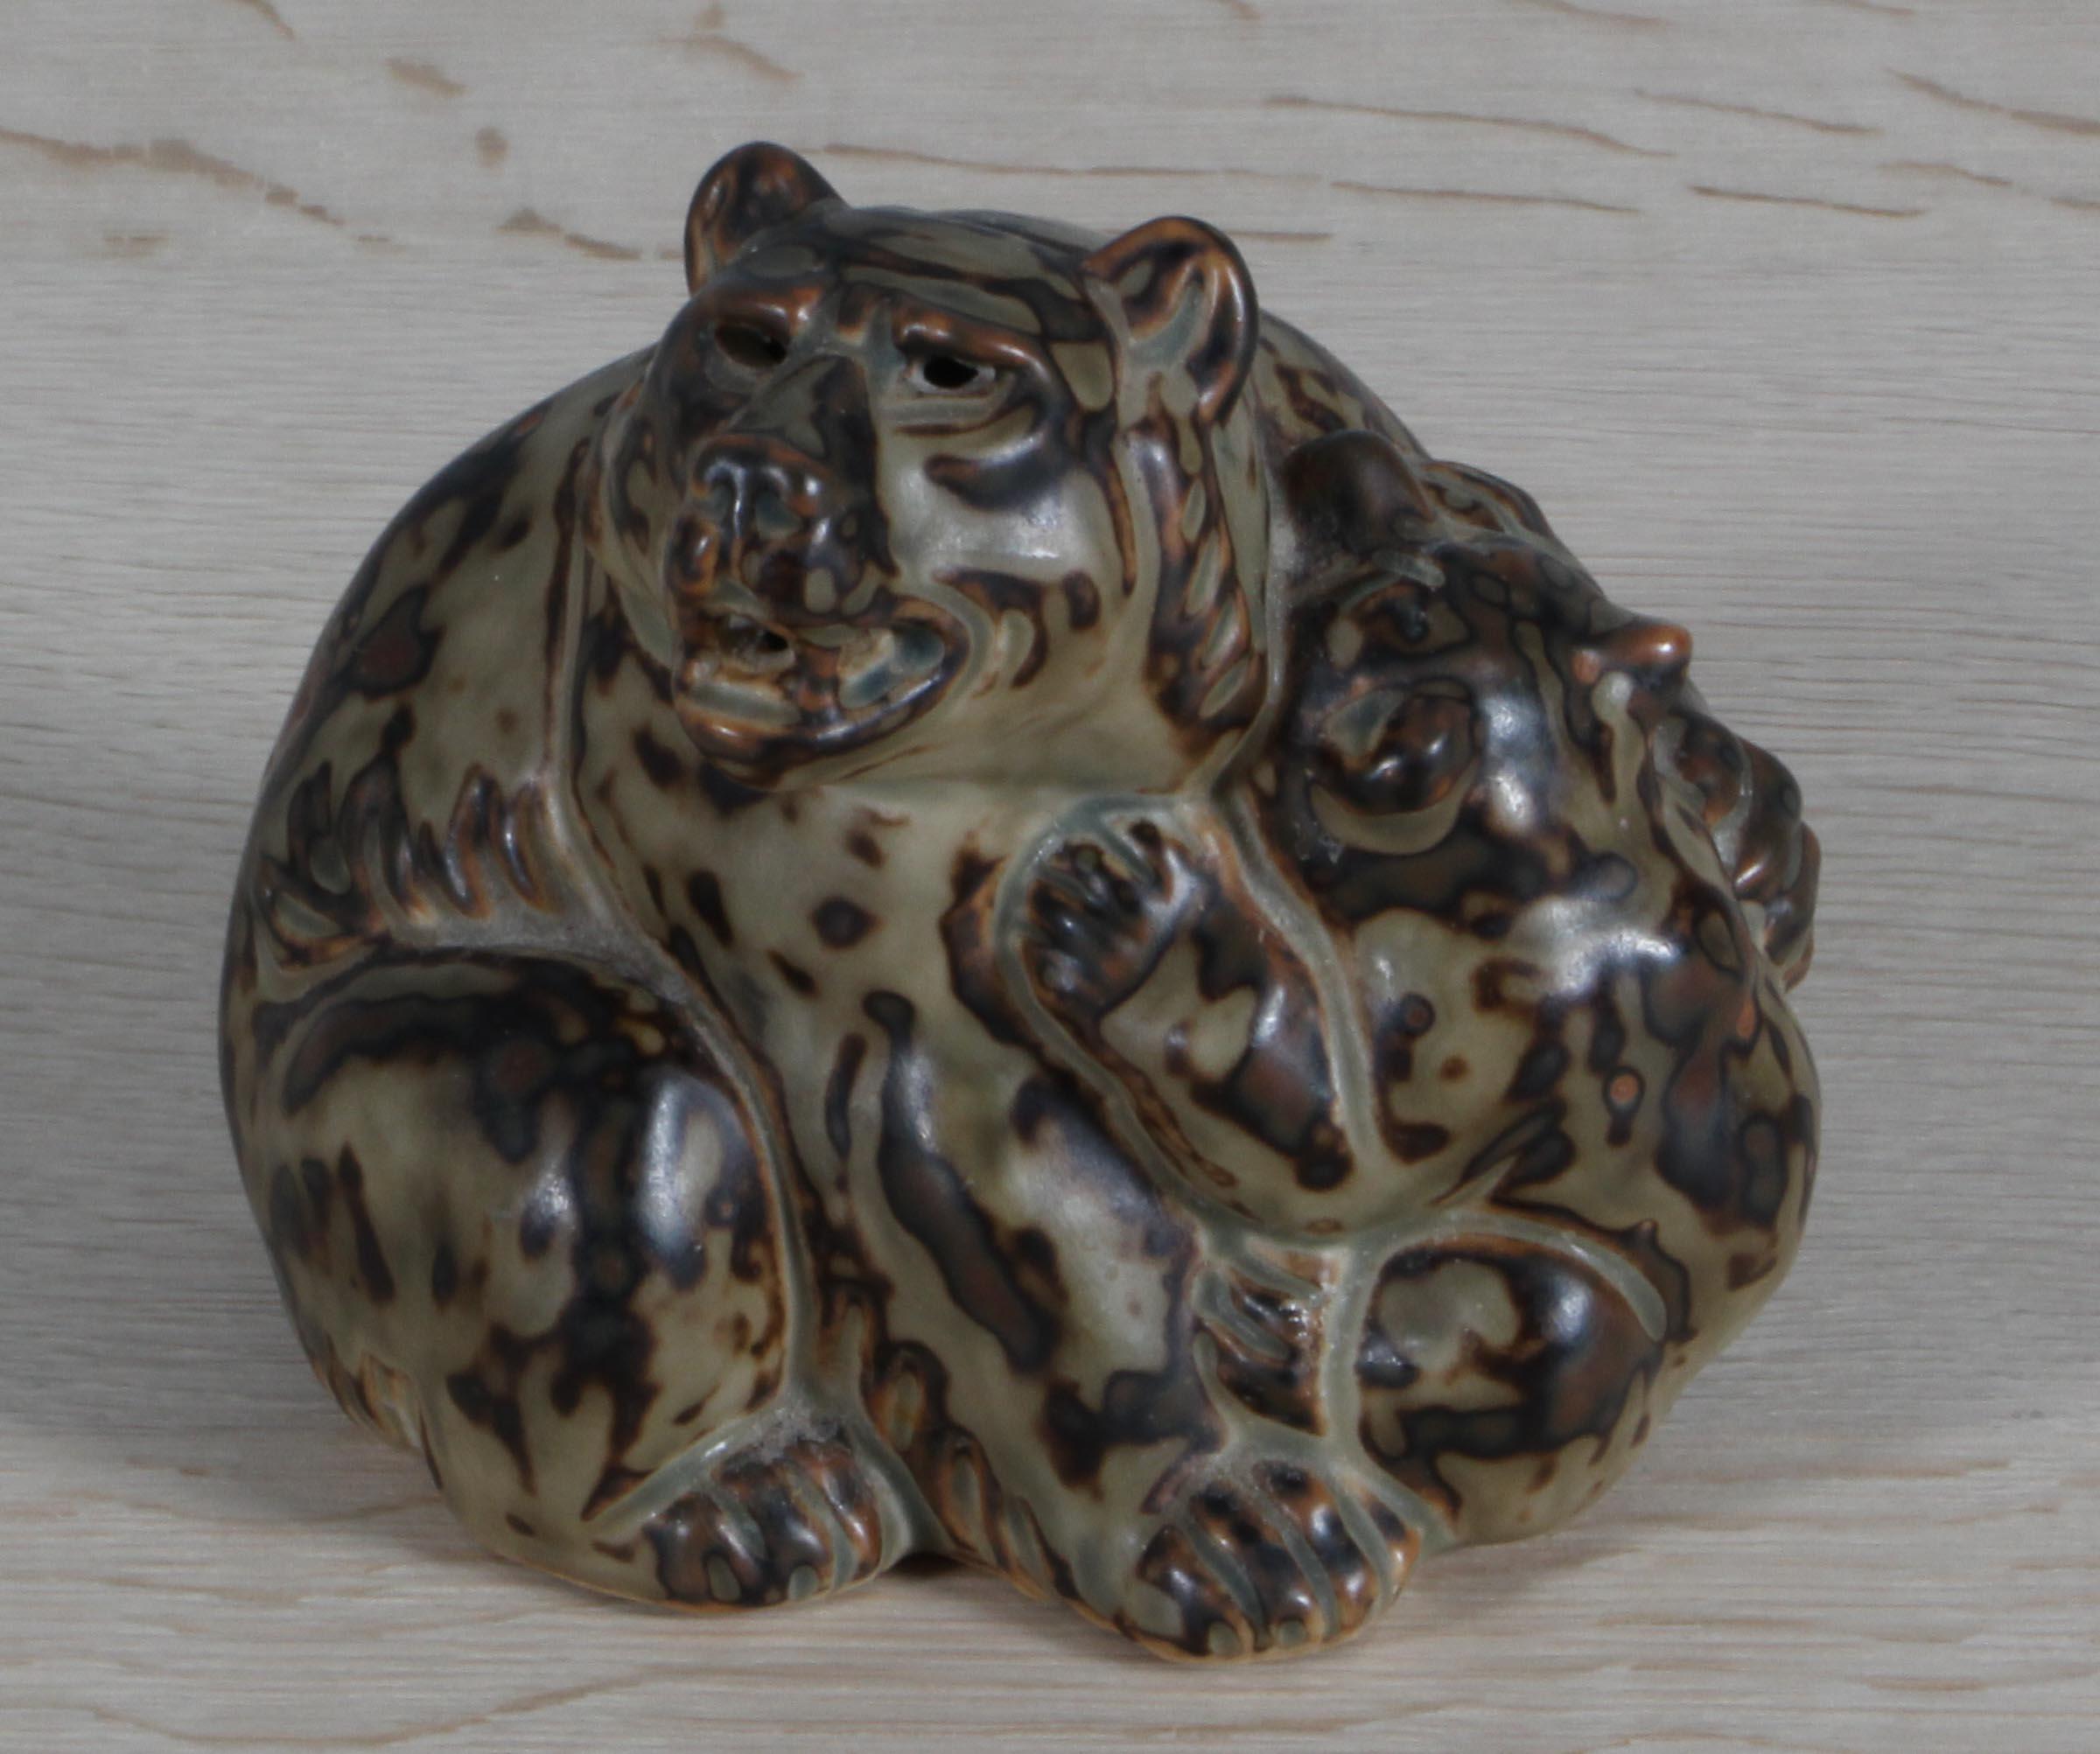 Bear with a bear baby glazed stoneware Roayal Copenhagen statue by Knud Kyhn.
Ceramic statue produced by Royal Copenhagen of Denmark in perfect condition.
Produced 1950s. Knud Kyhn 1880-1969 was a Danish painter, artist and ceramic sculptor who